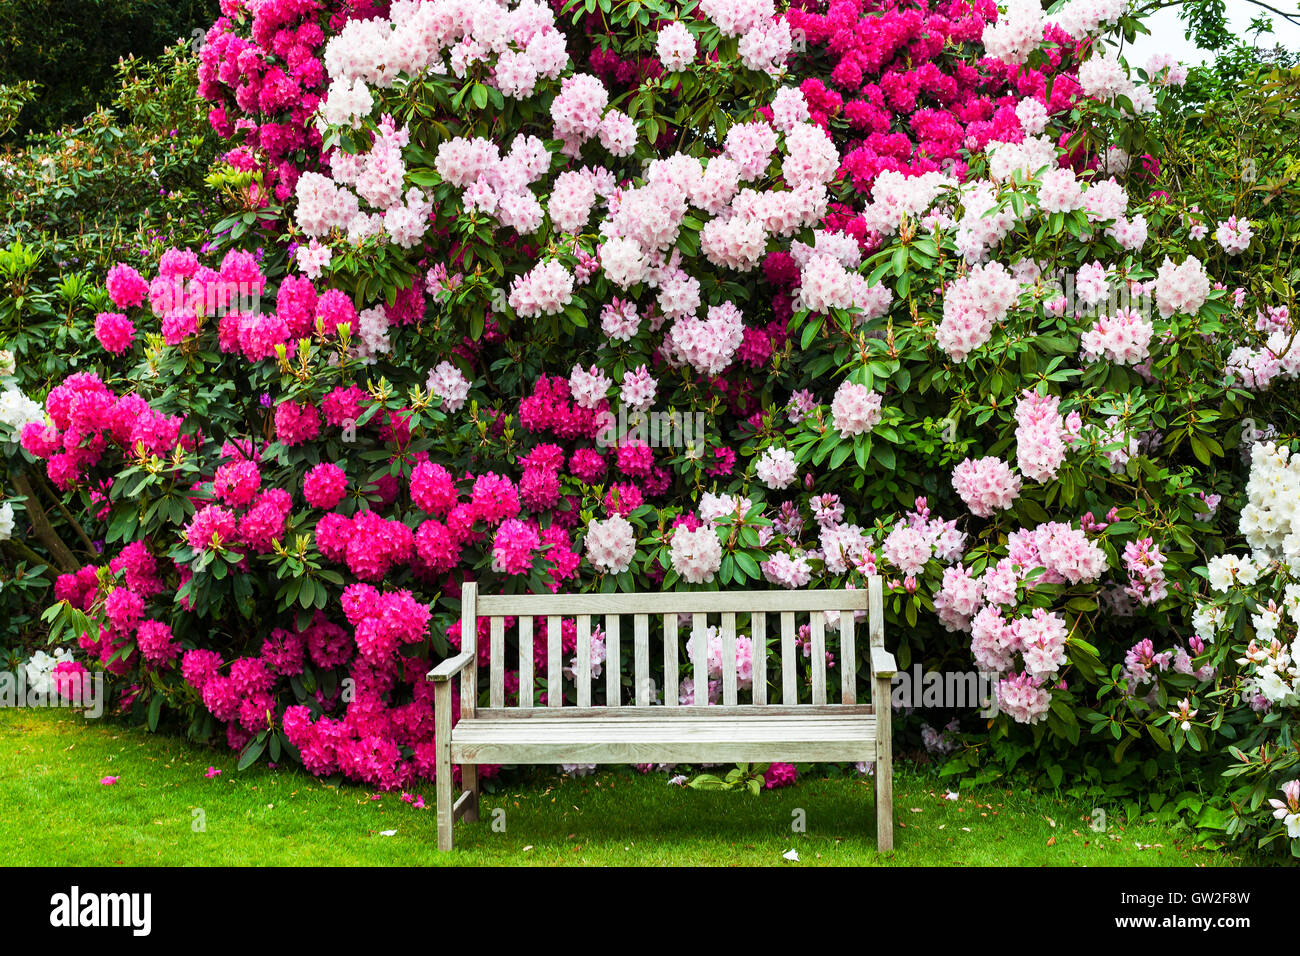 Garden with rhododendrons and old wooden bench. Stock Photo